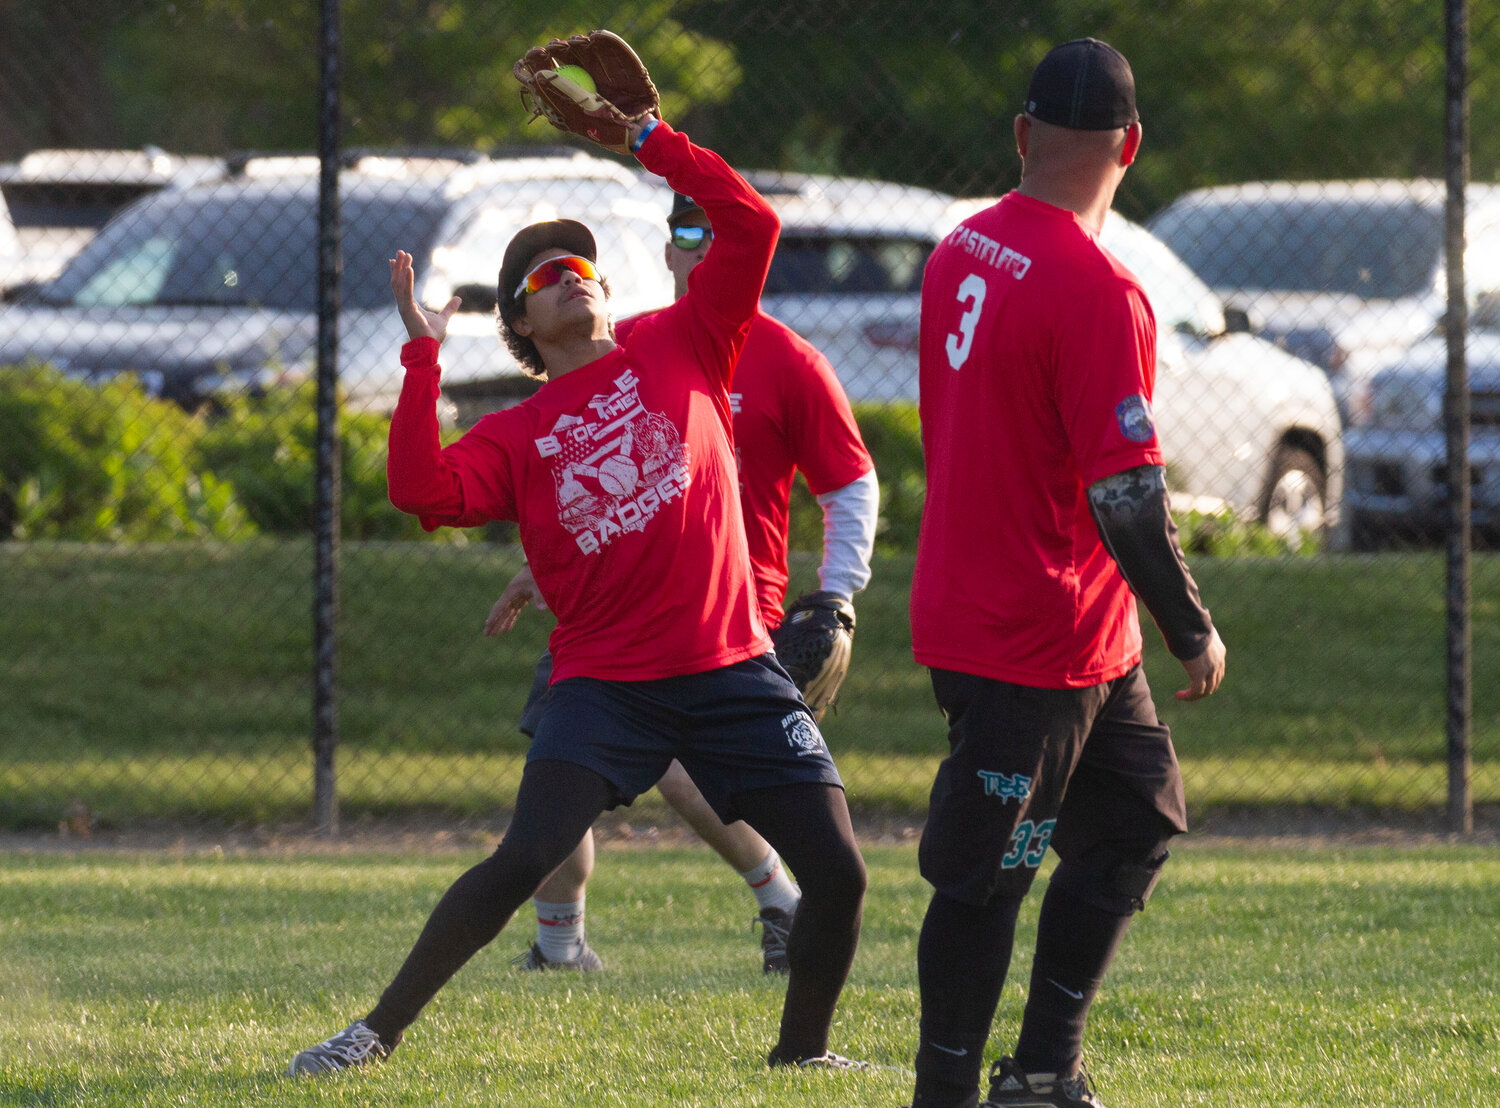 Aidan Litchko makes a catch in centerfield. The firefighter made several outstanding plays in the outfield and belted two hits during the game.